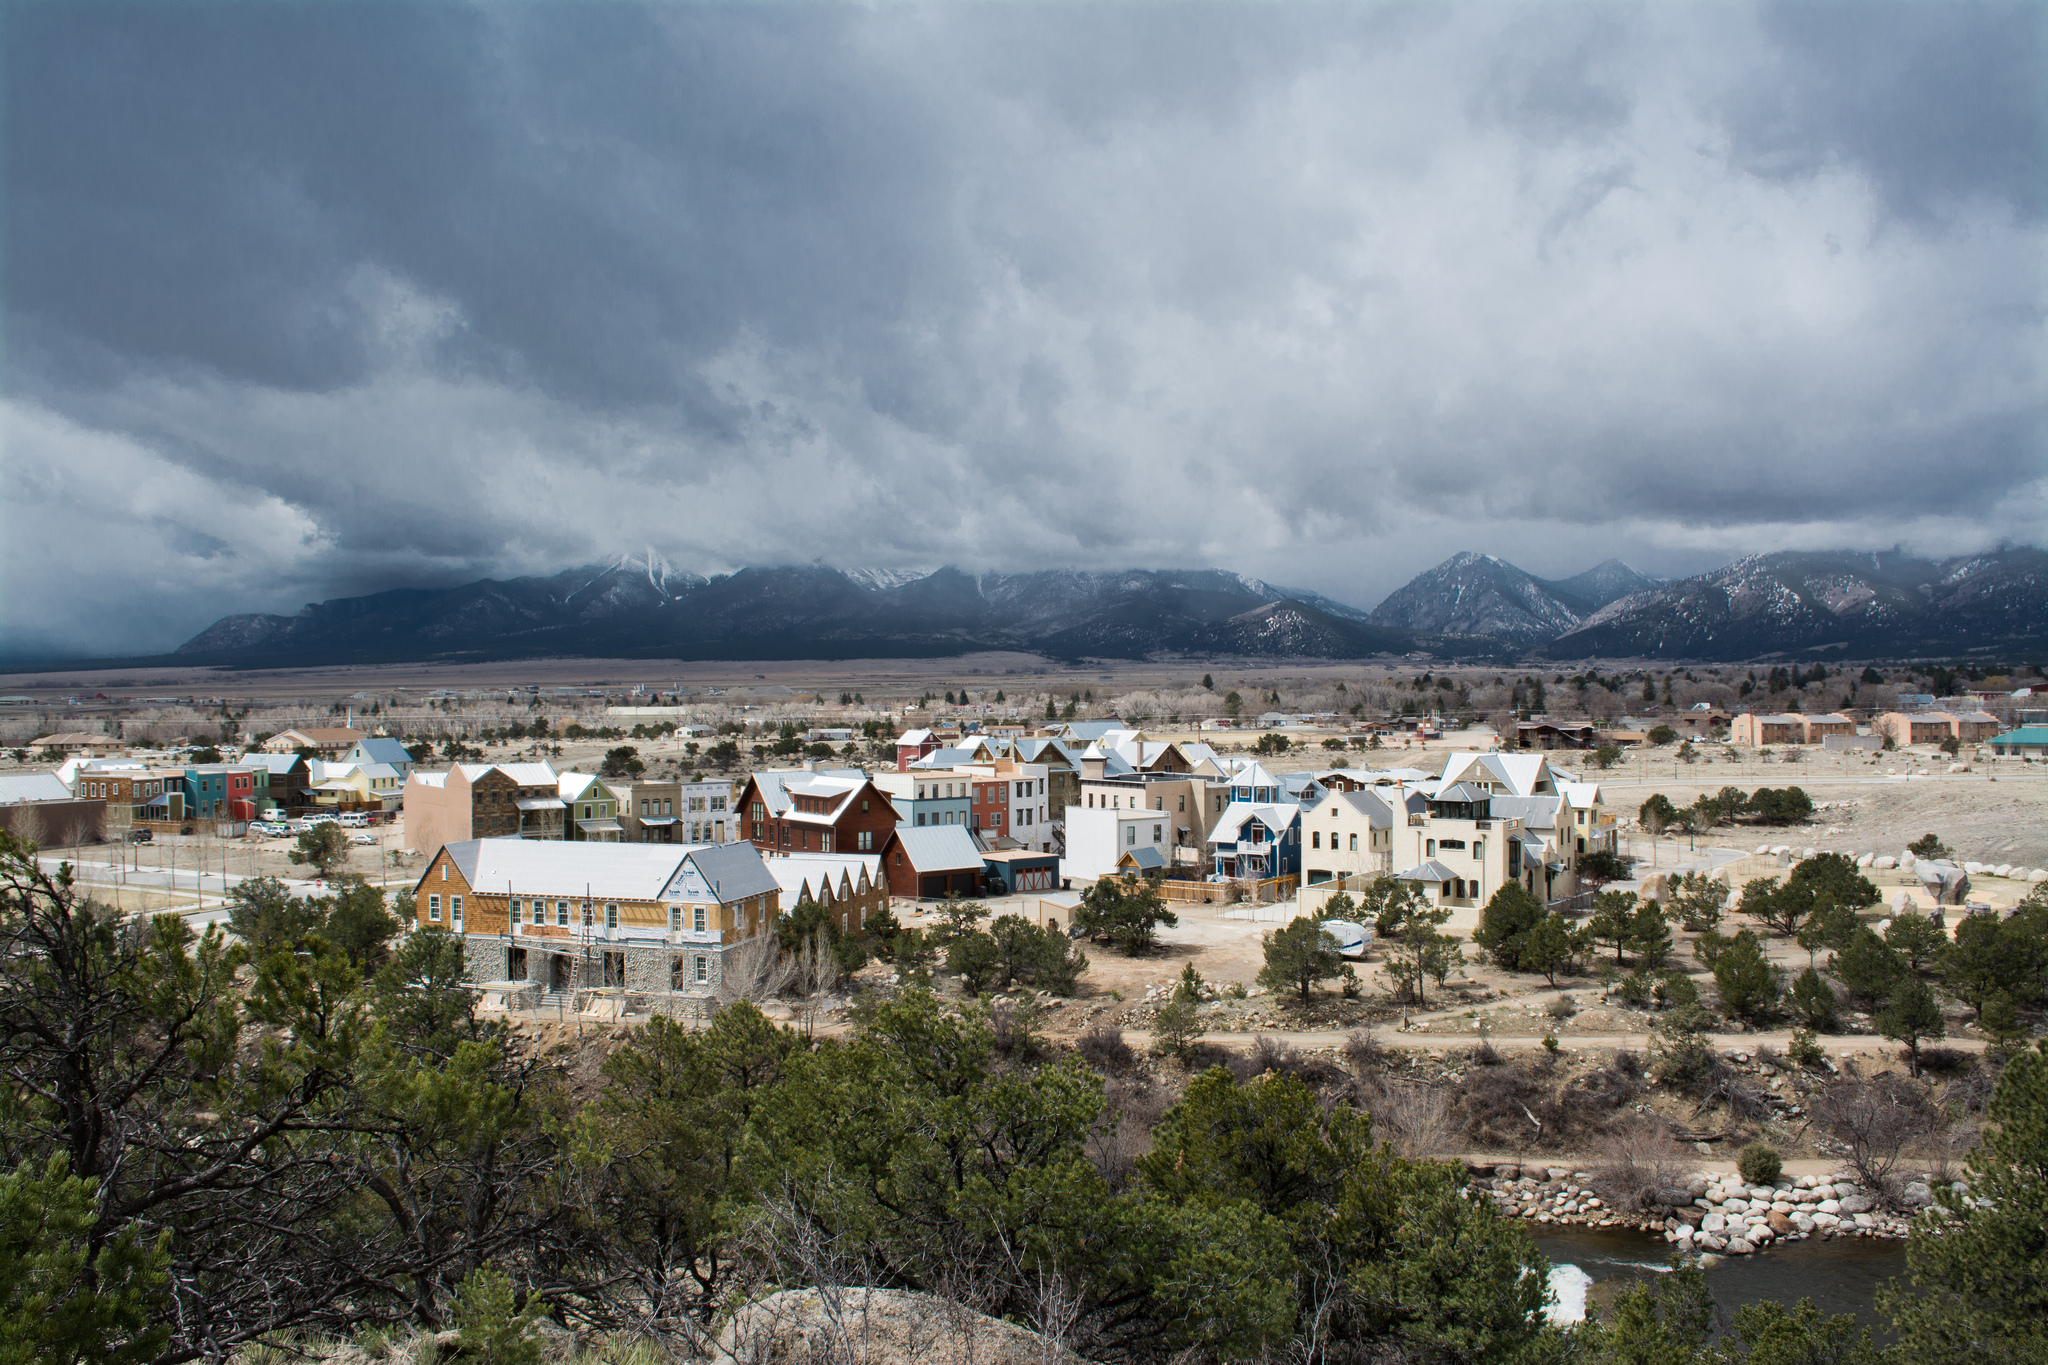 A small town in a mountain valley under cloudy skies